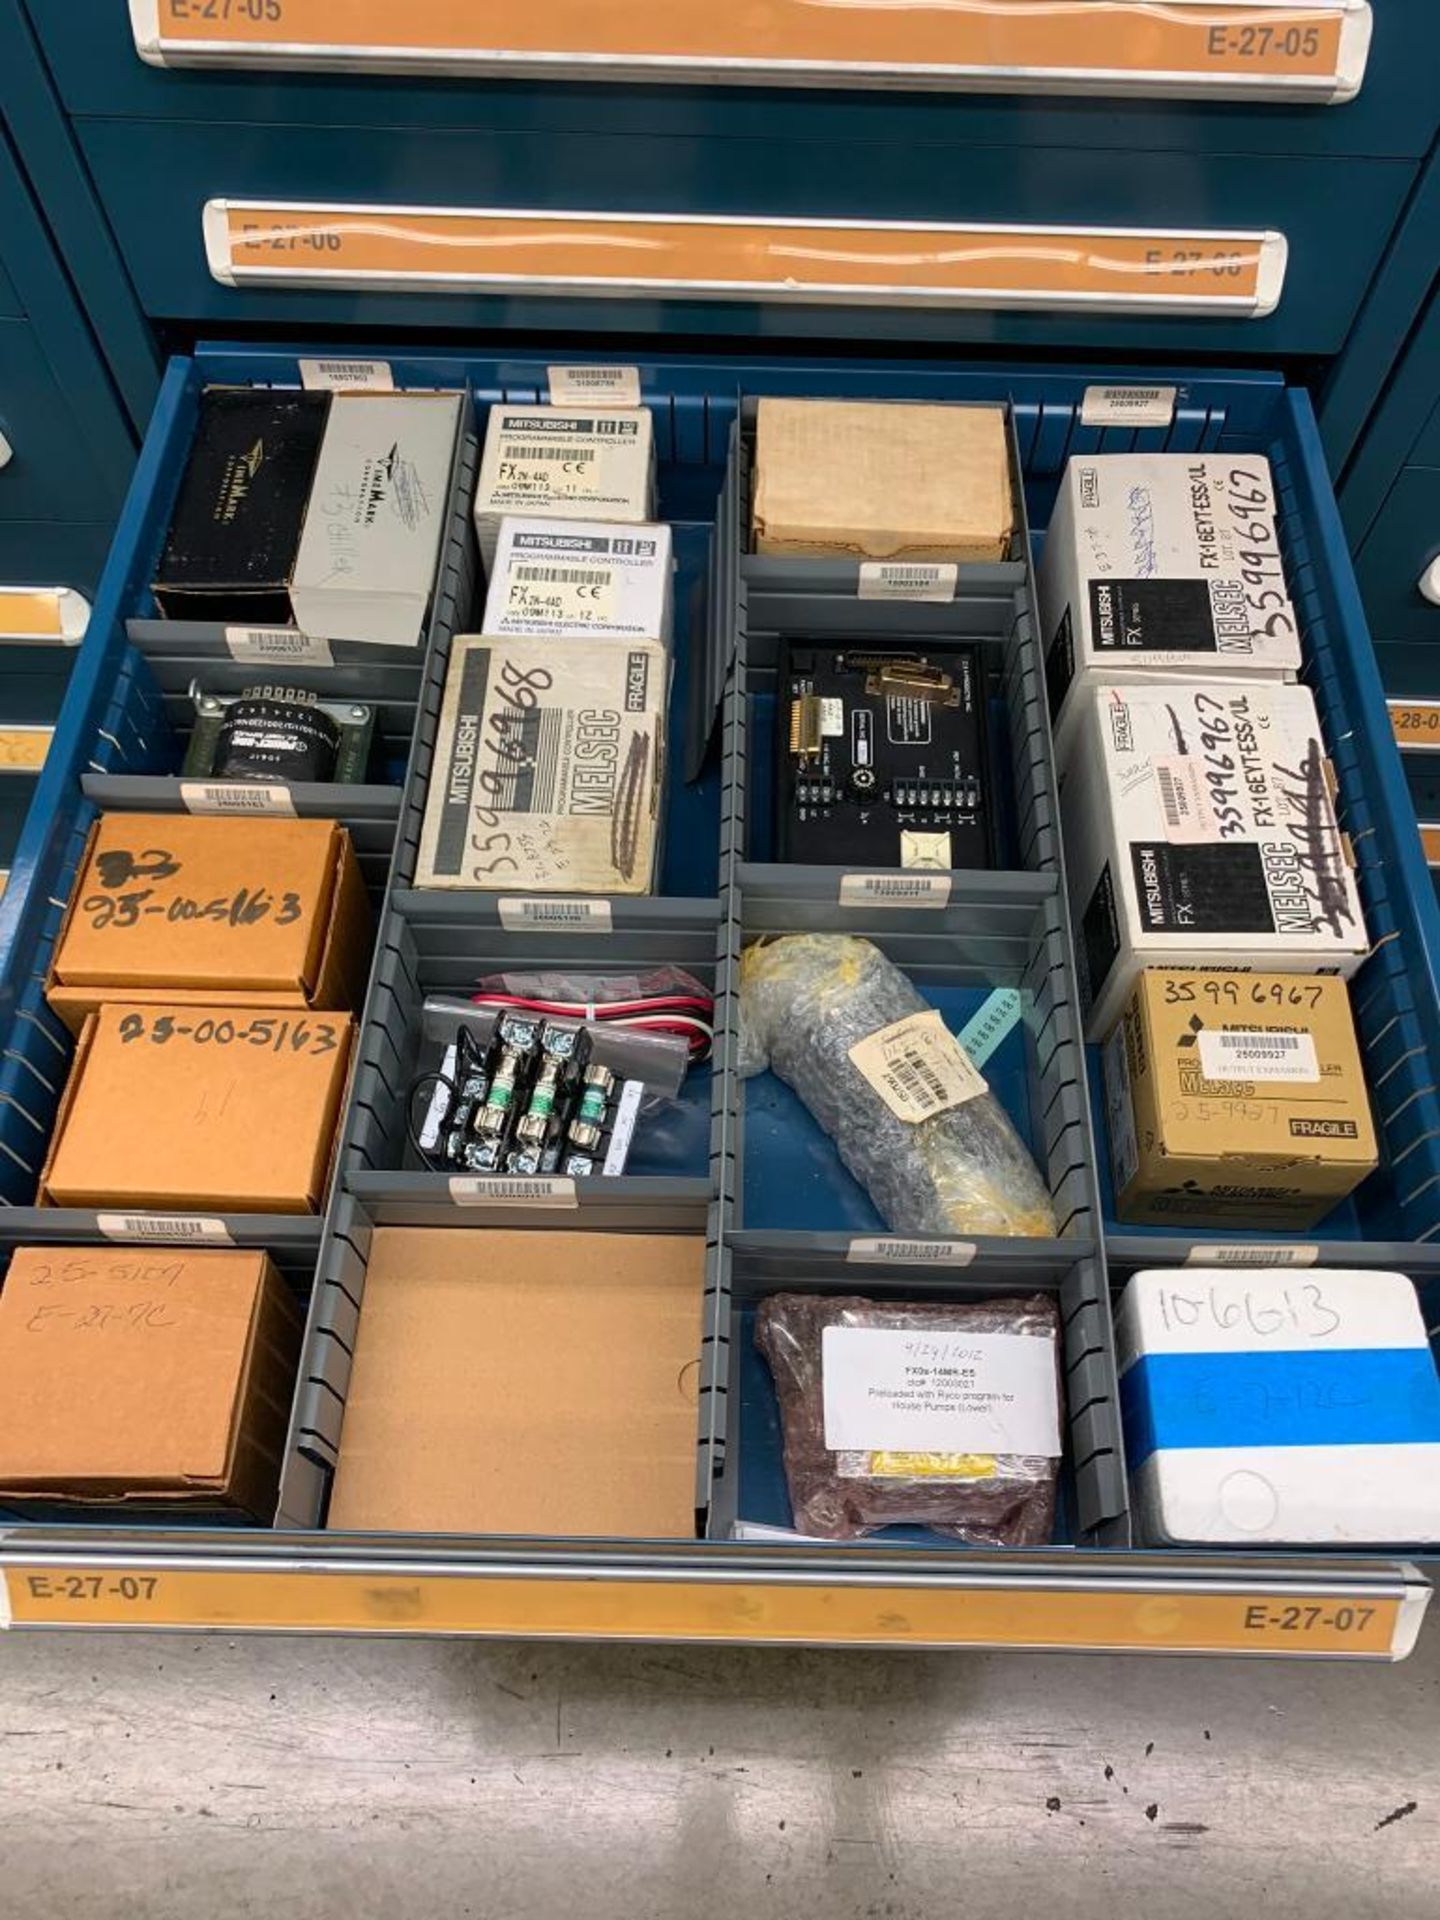 Vidmar 10-Drawer Cabinet w/ Air Solenoids, Coils, Transformers, Controllers, Contactors, Power Suppl - Image 8 of 17